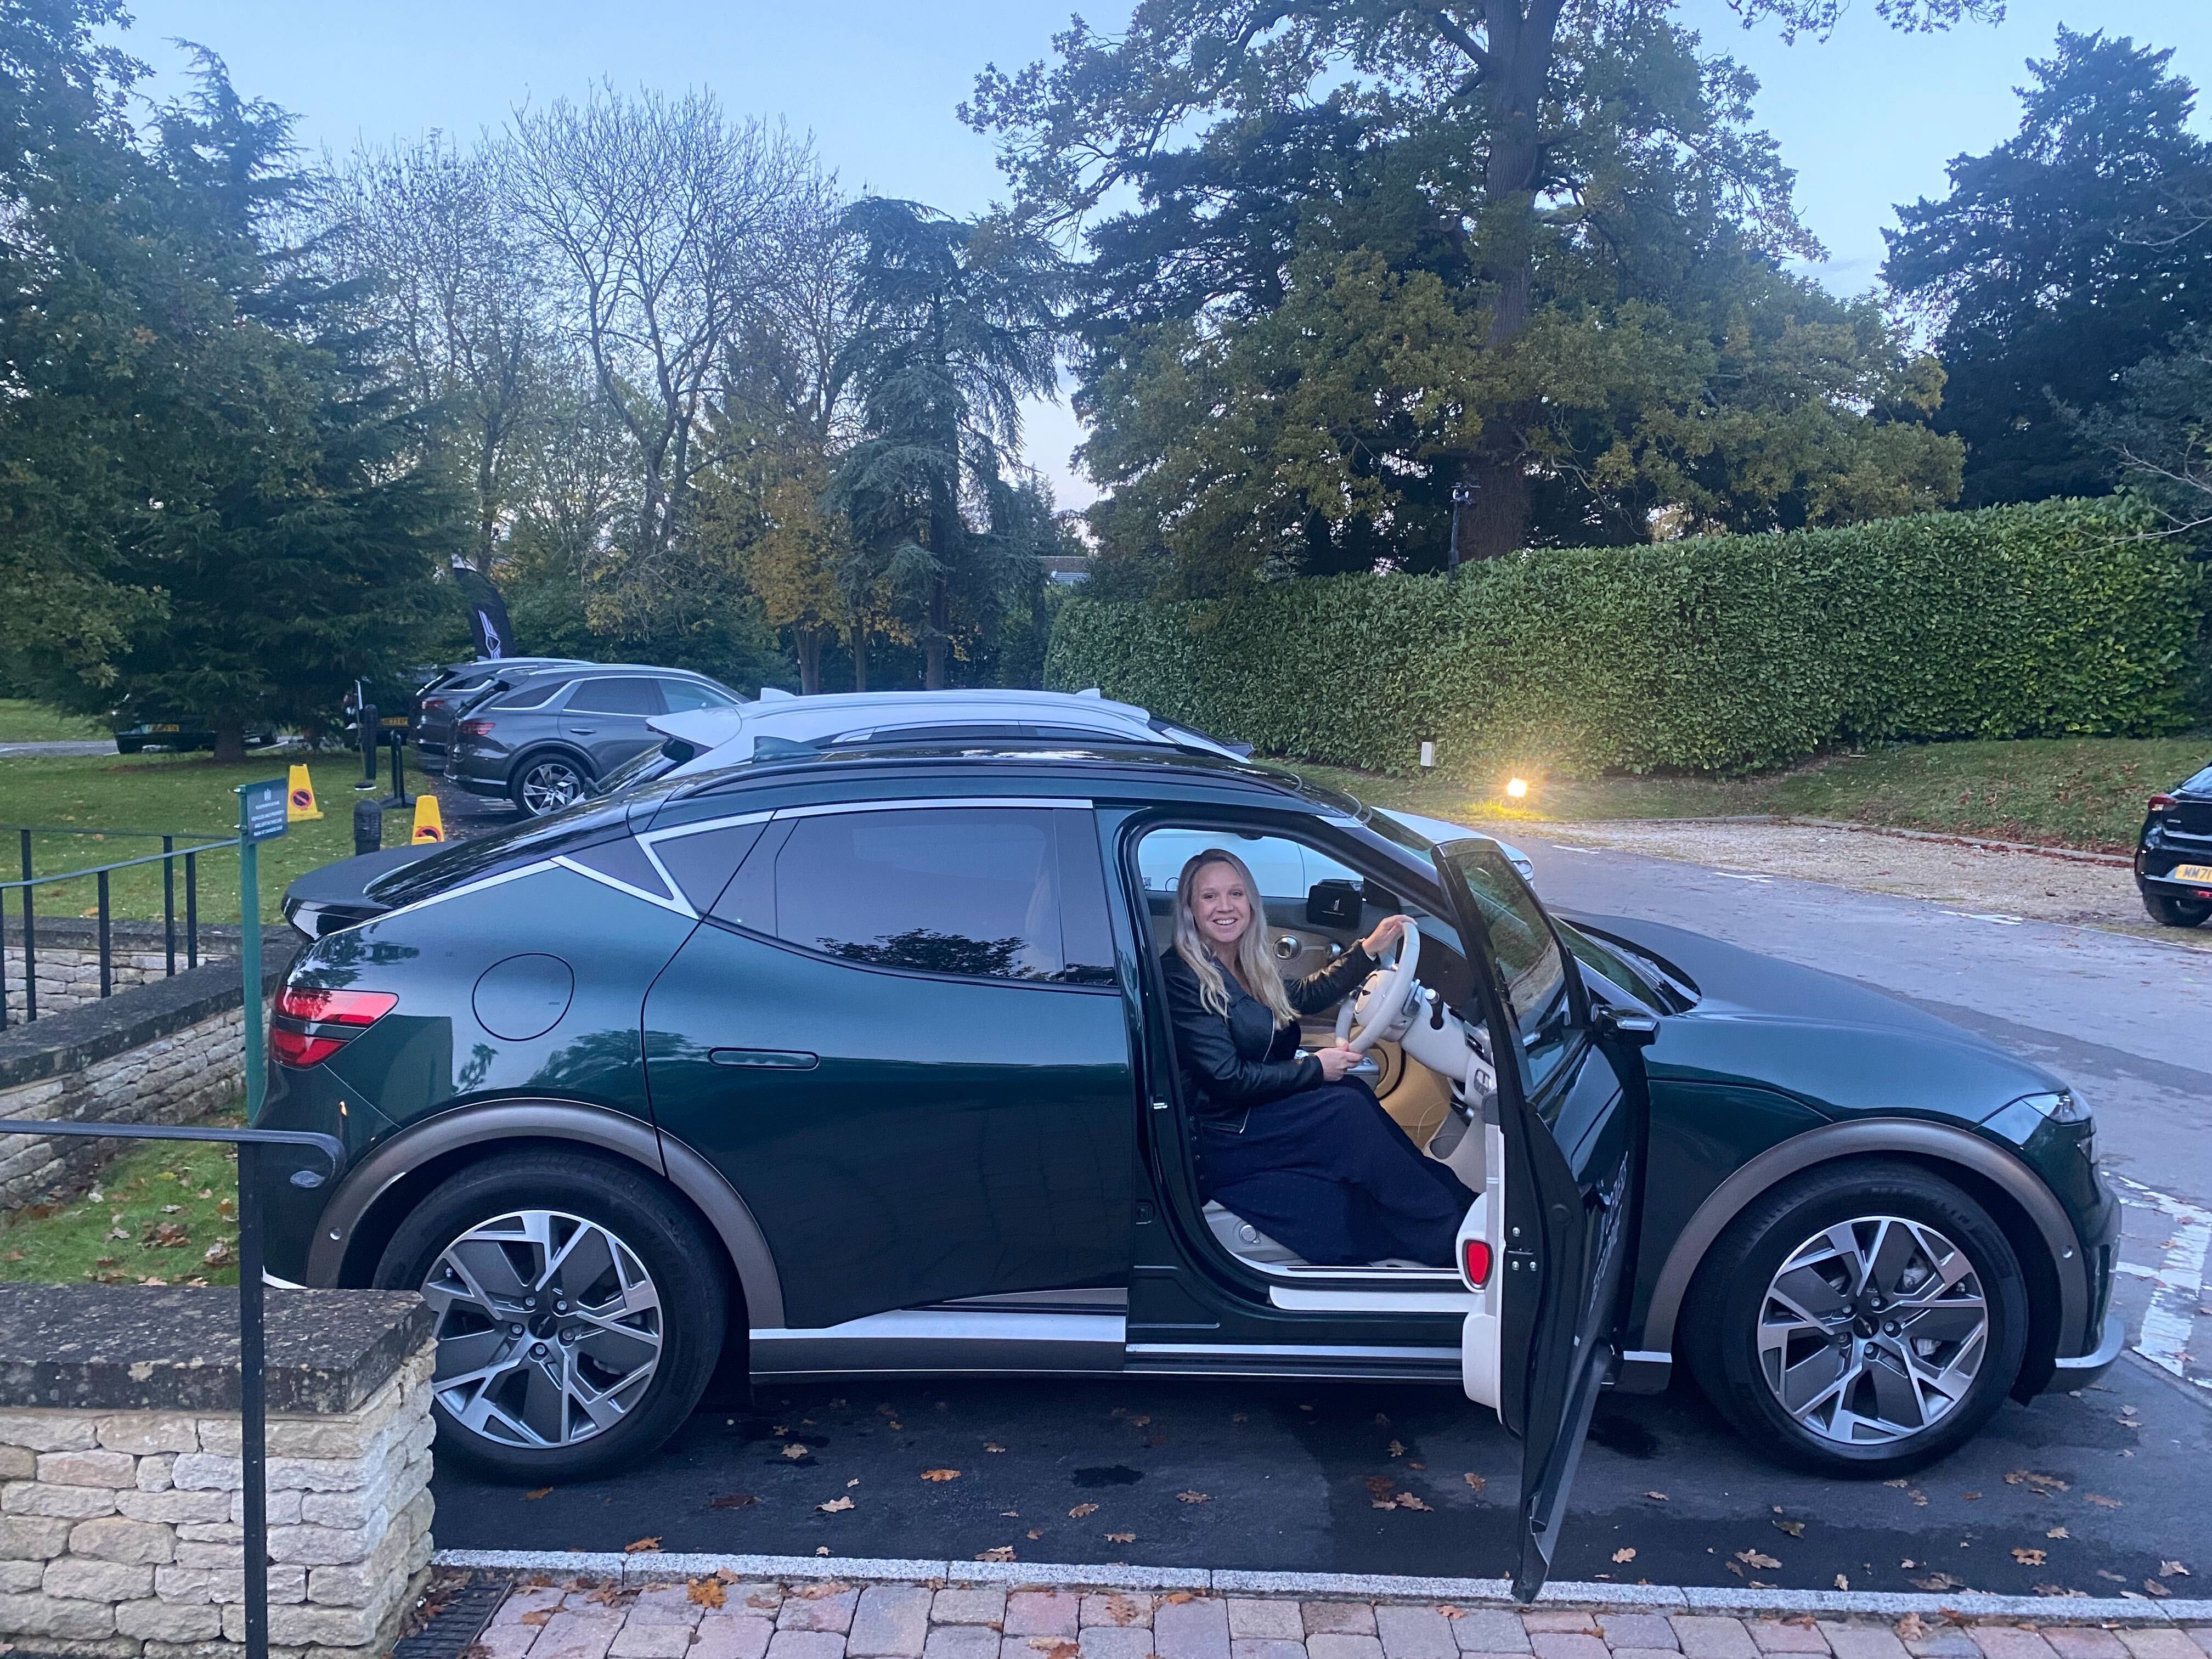 Zapmap’s Content Executive Nic test drives a Genesis GV60 at the She’s Electric event in Cheltenham.